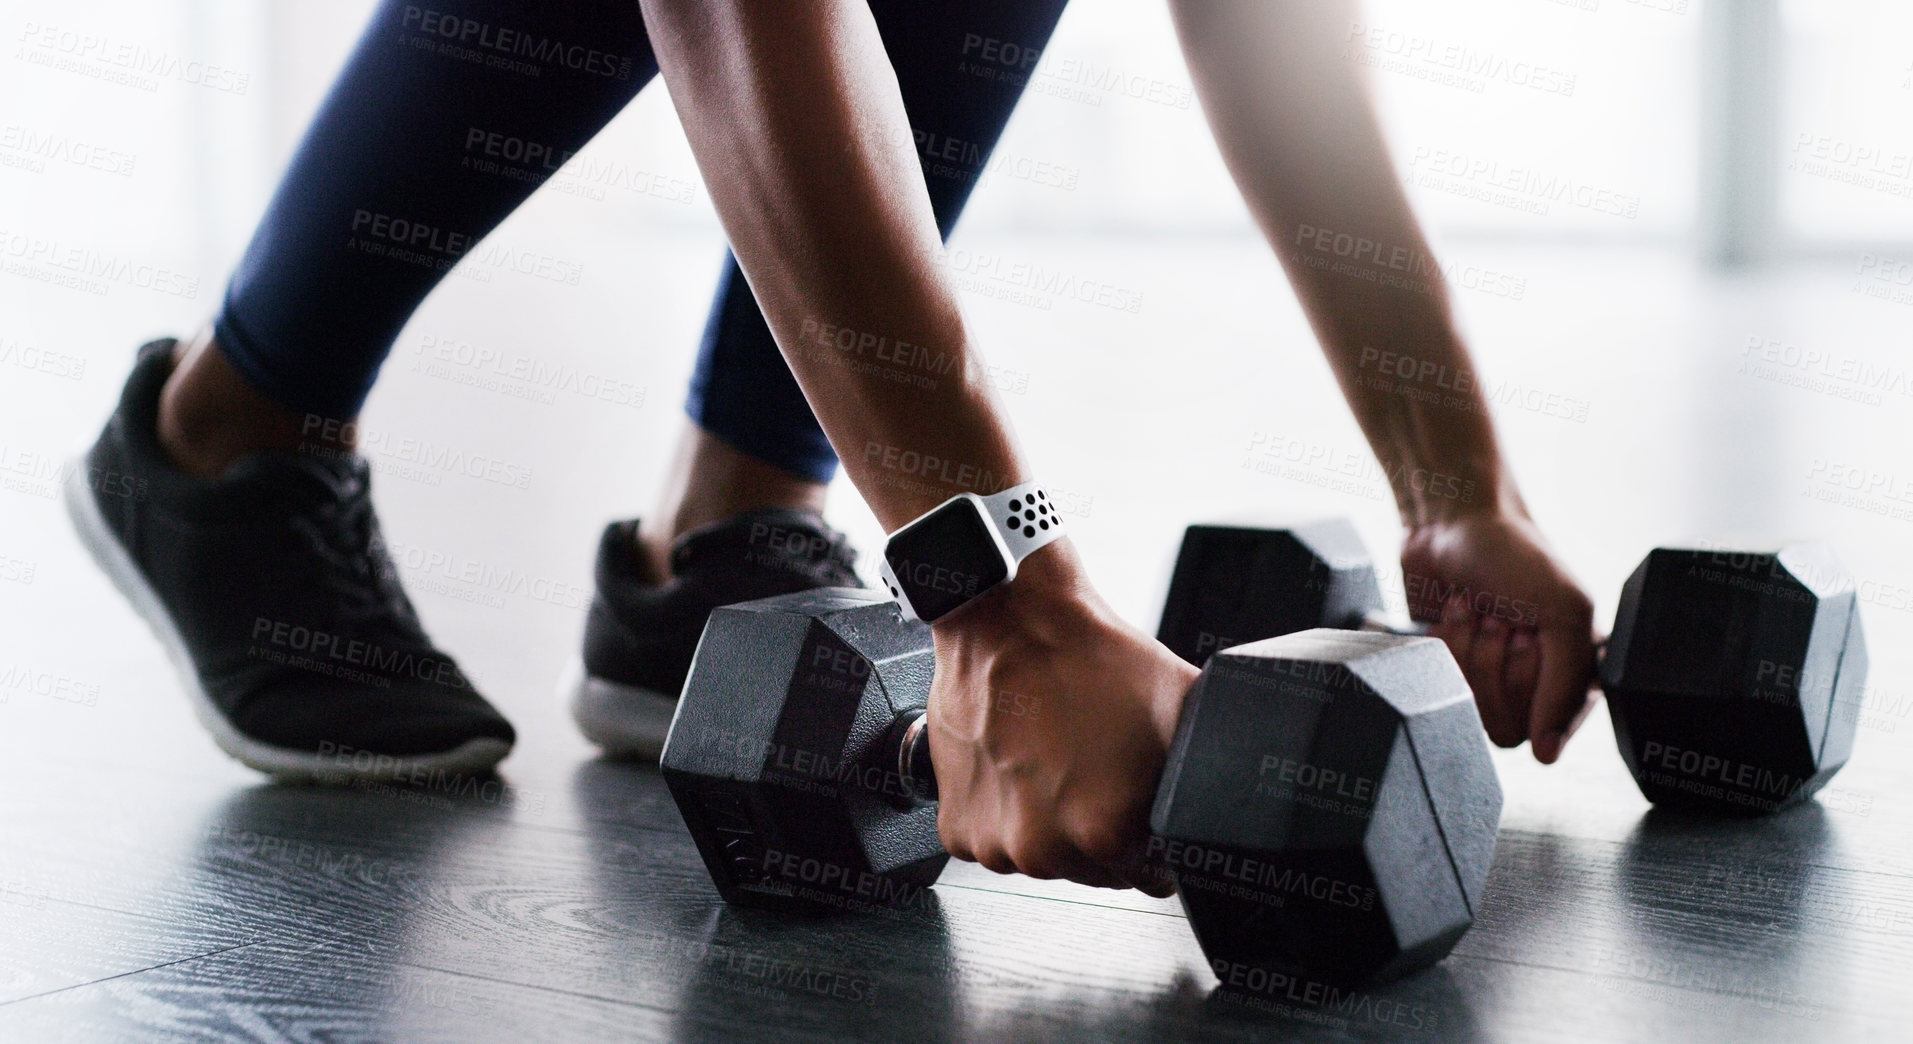 Buy stock photo Cropped shot of a woman working out with dumbbells in a gym